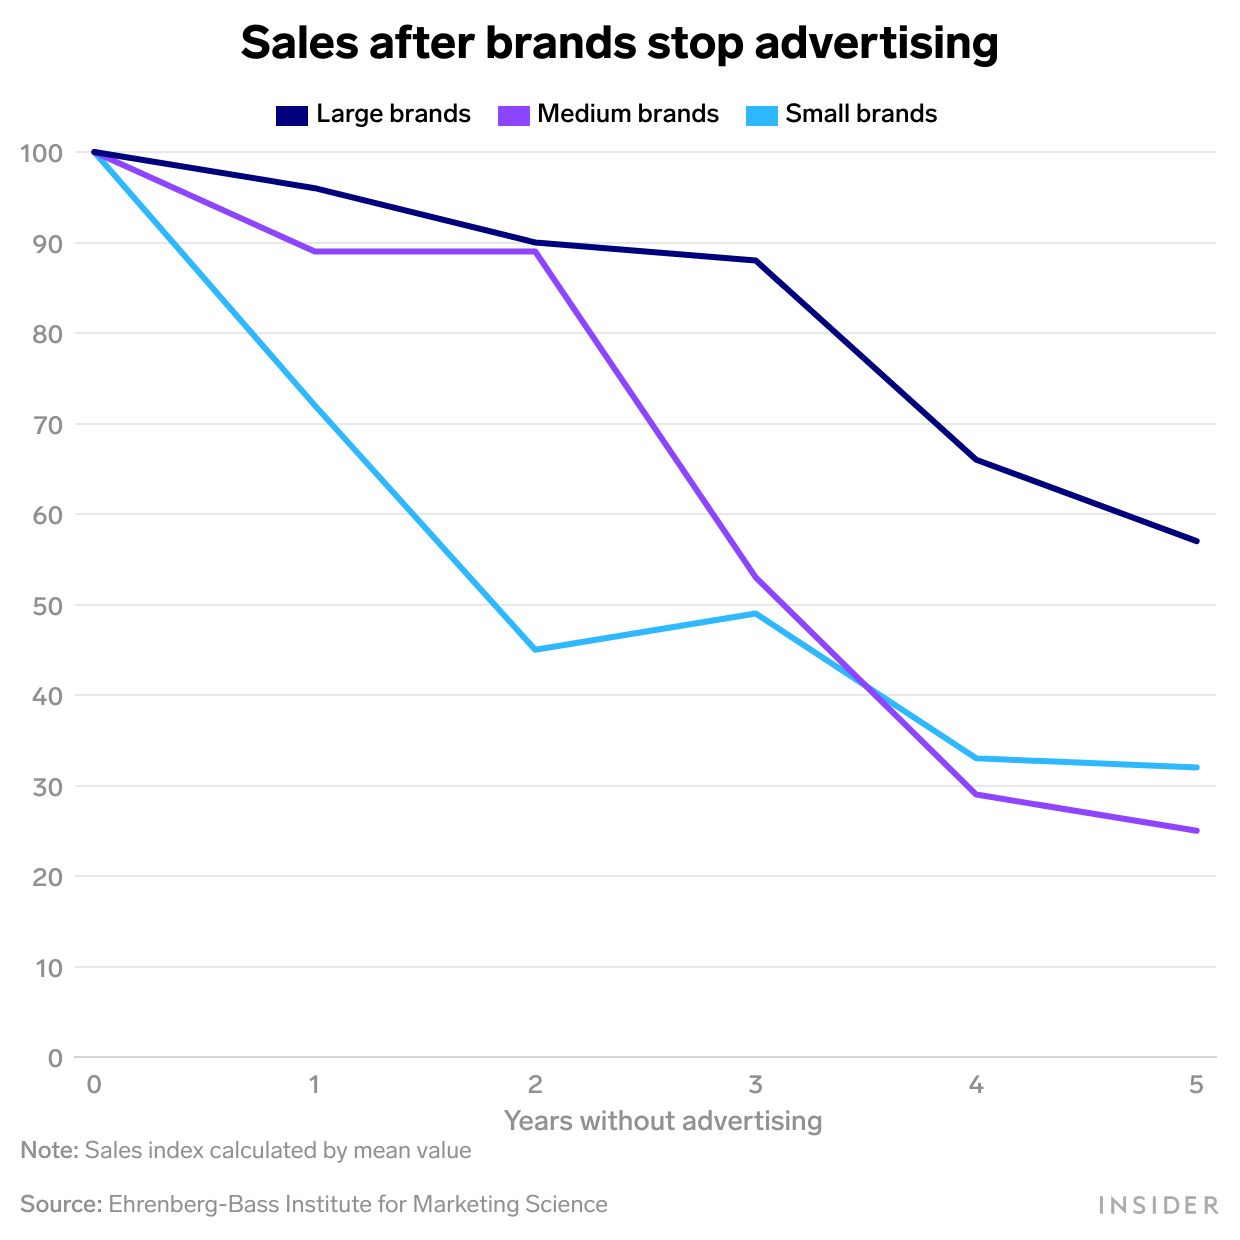 Line chart showing a decline in indexed sales after stopping advertising for large, medium, and small brands